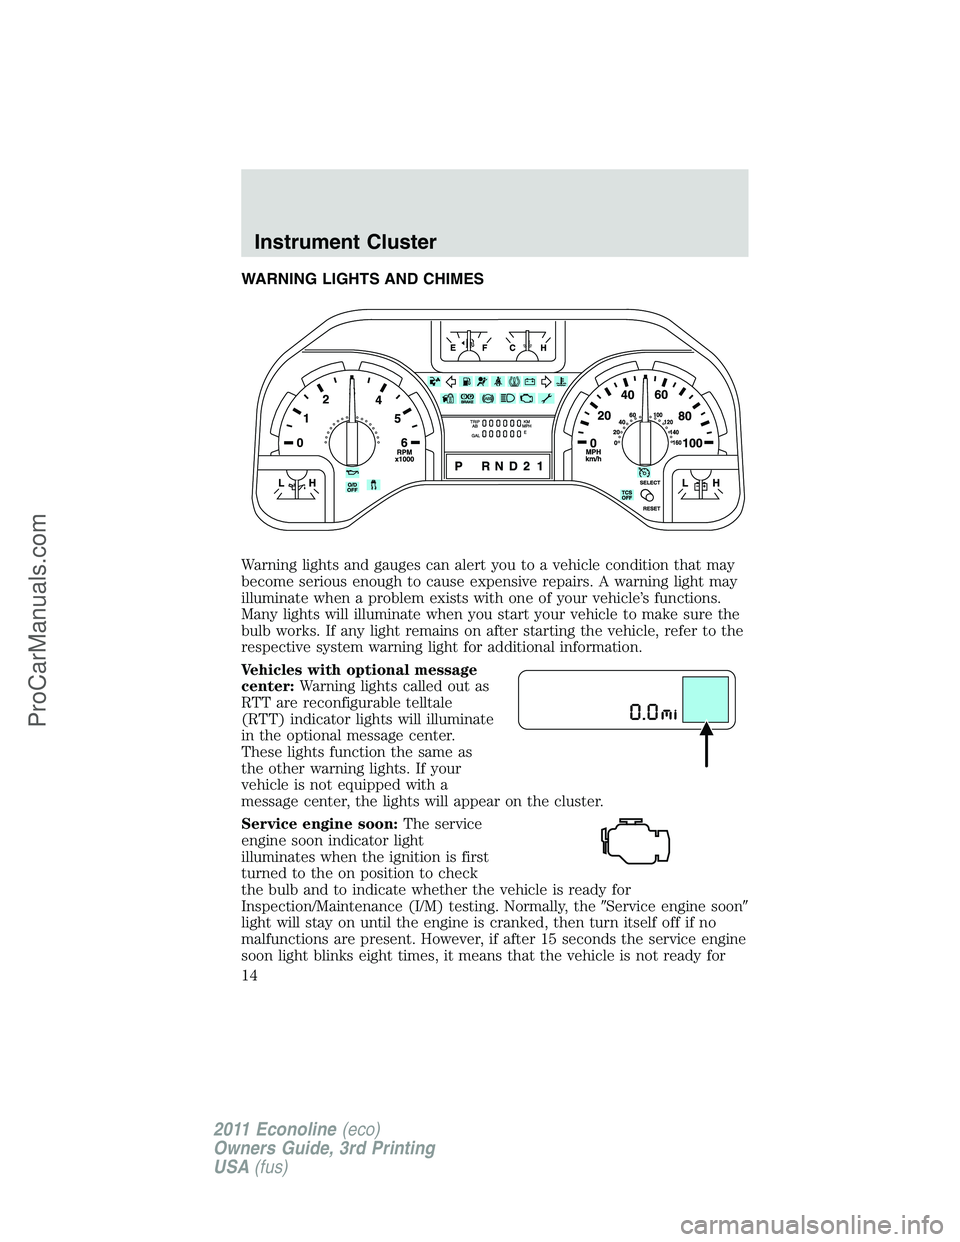 FORD E-450 2011  Owners Manual WARNING LIGHTS AND CHIMES
Warning lights and gauges can alert you to a vehicle condition that may
become serious enough to cause expensive repairs. A warning light may
illuminate when a problem exists